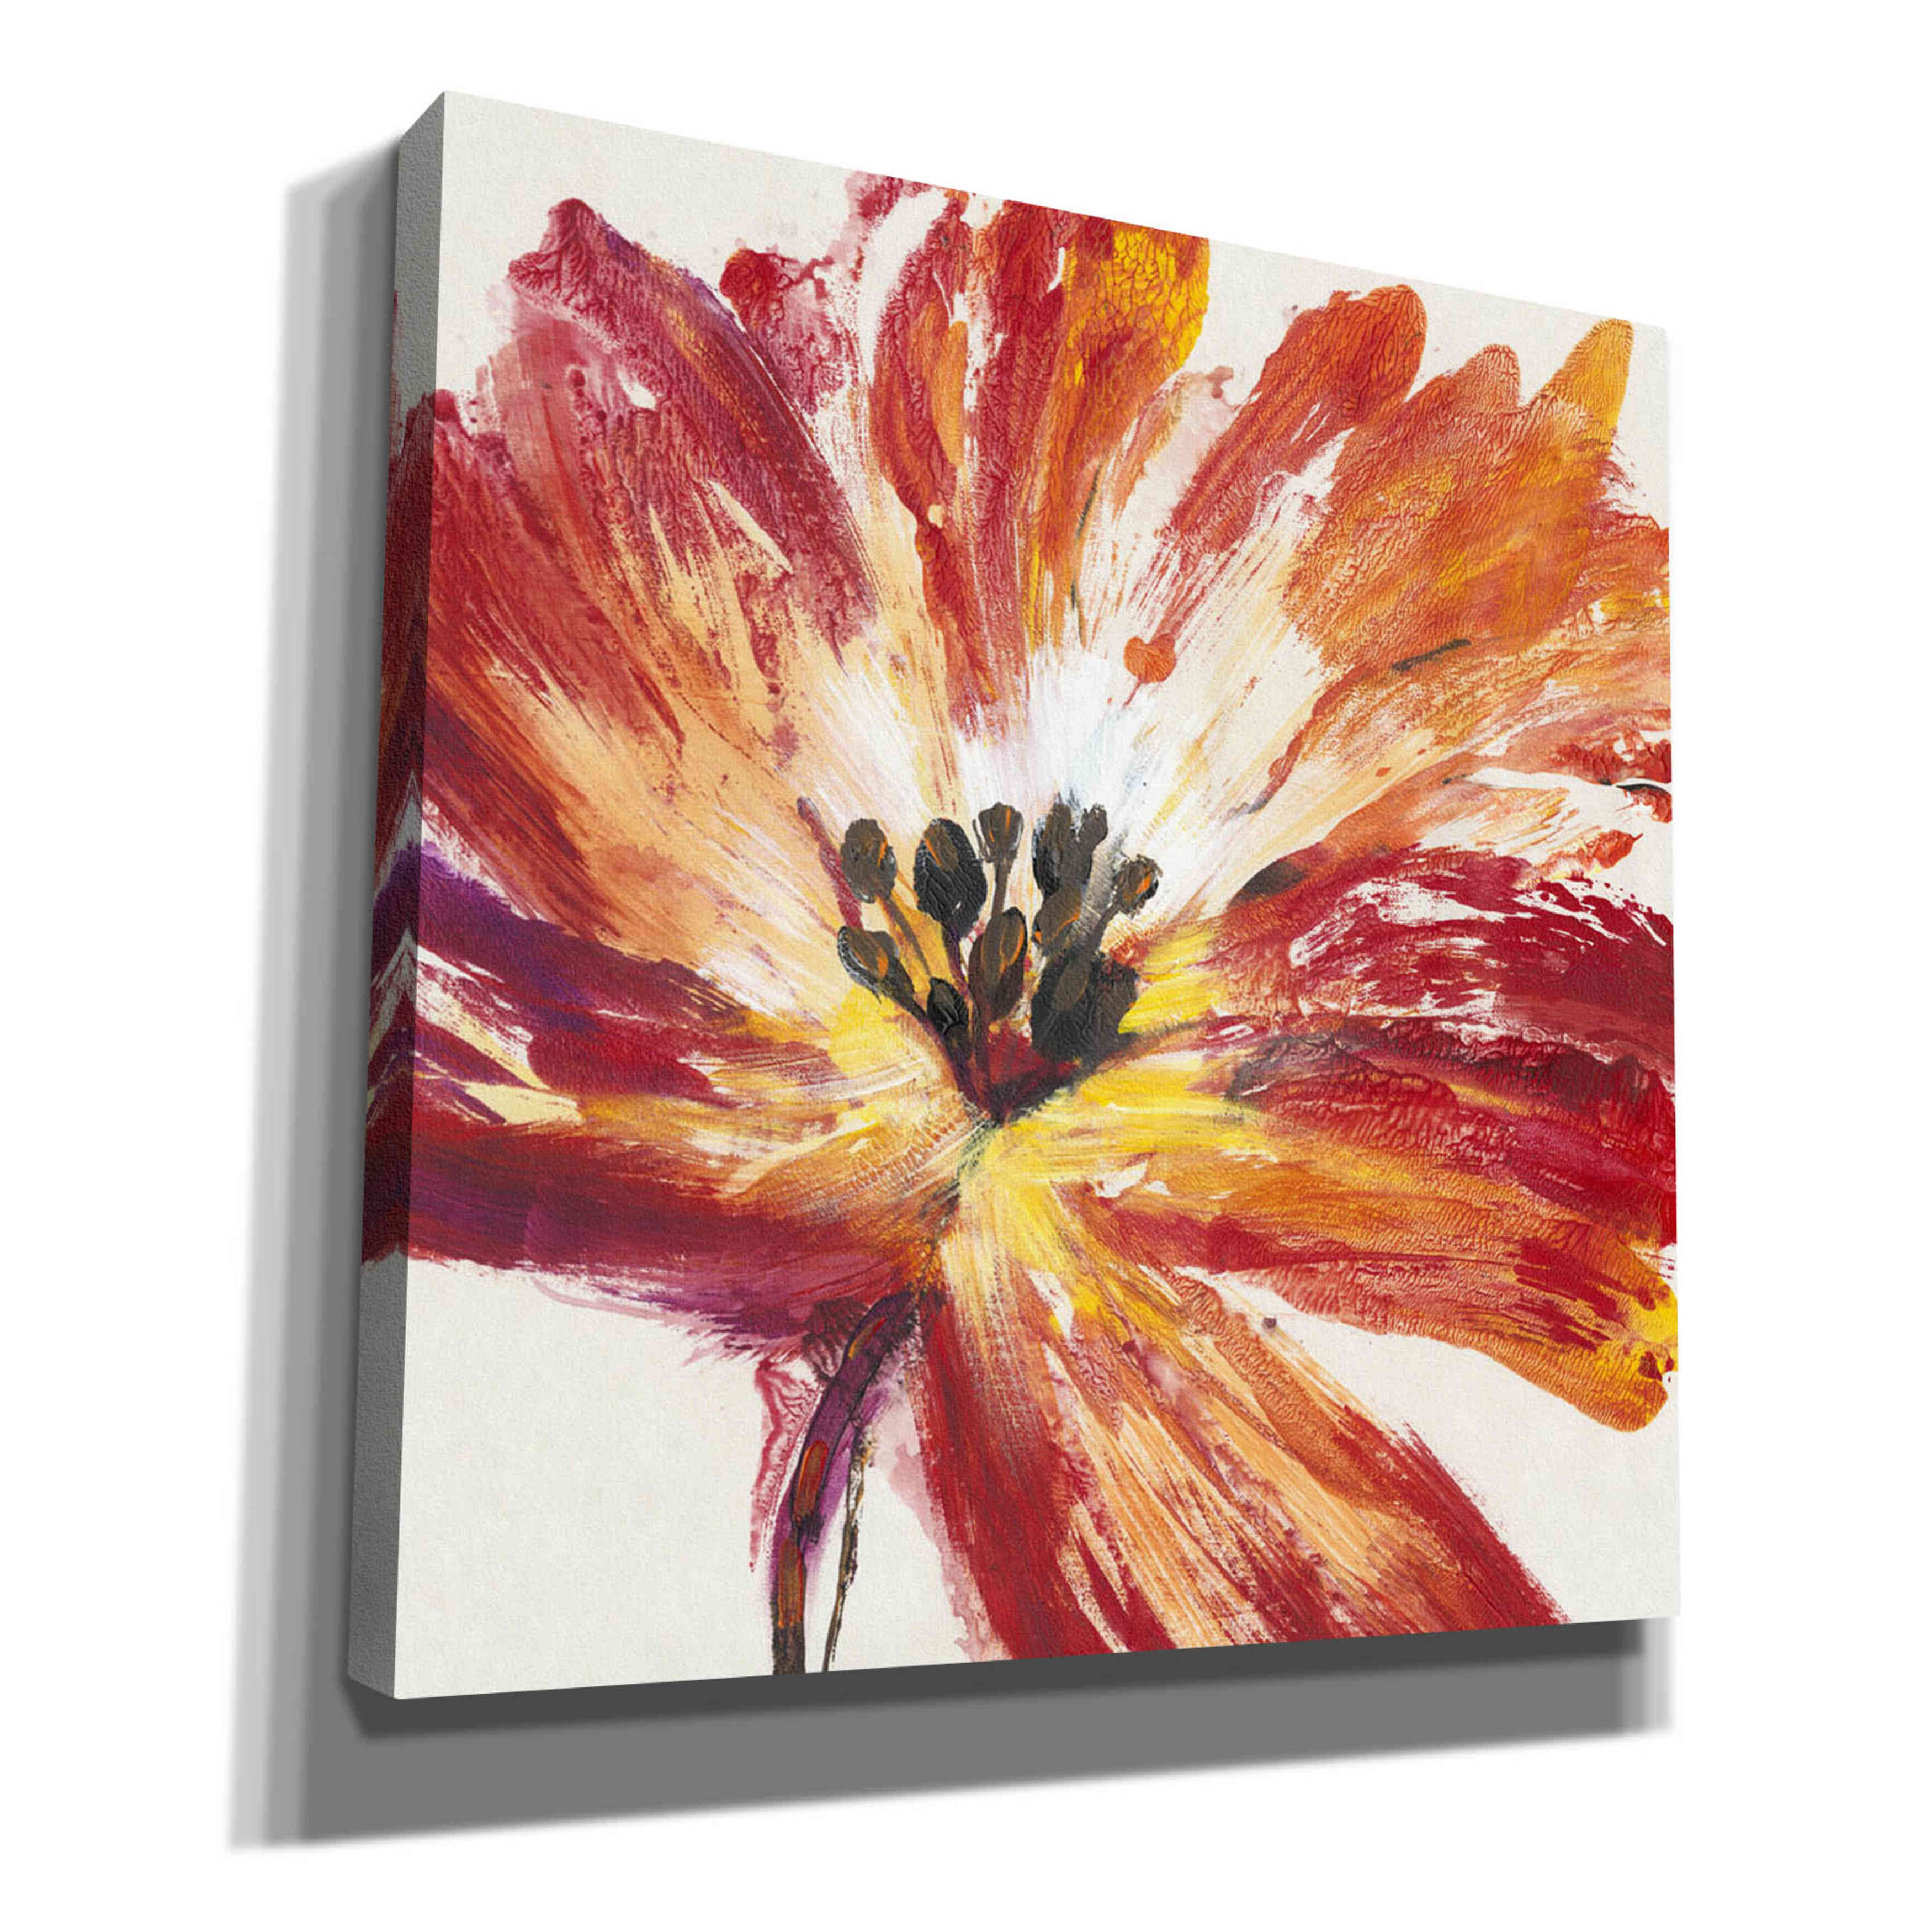 Red Barrel Studio® Hand-painted Oil Painting On Canvas Flowers Paint On  Plastic / Acrylic Painting